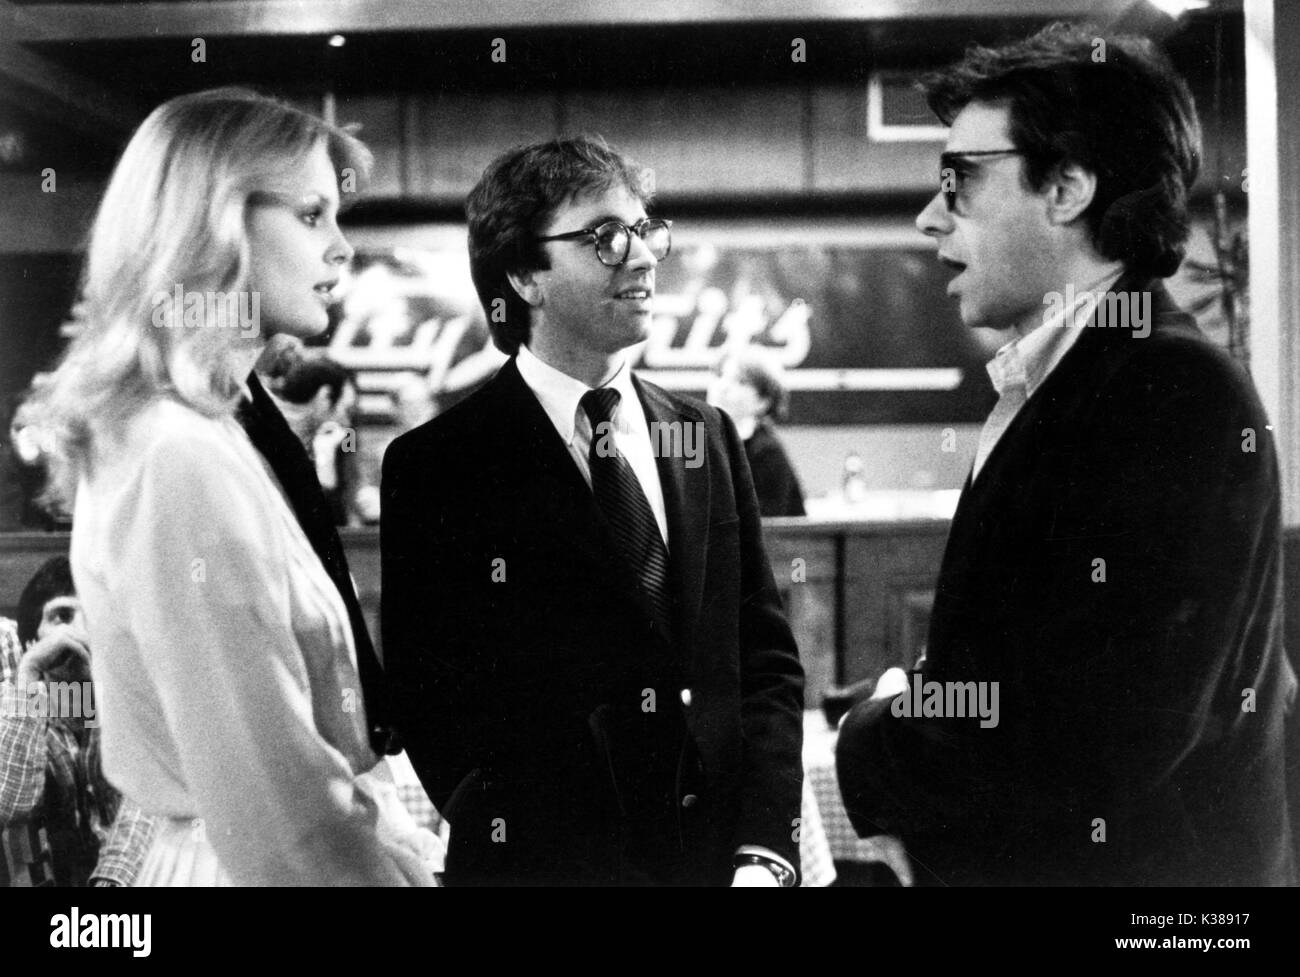 THEY ALL LAUGHED L-R, DOROTHY STRATTEN, JOHN RITTER, PETER BOGDANOVICH Stock Photo